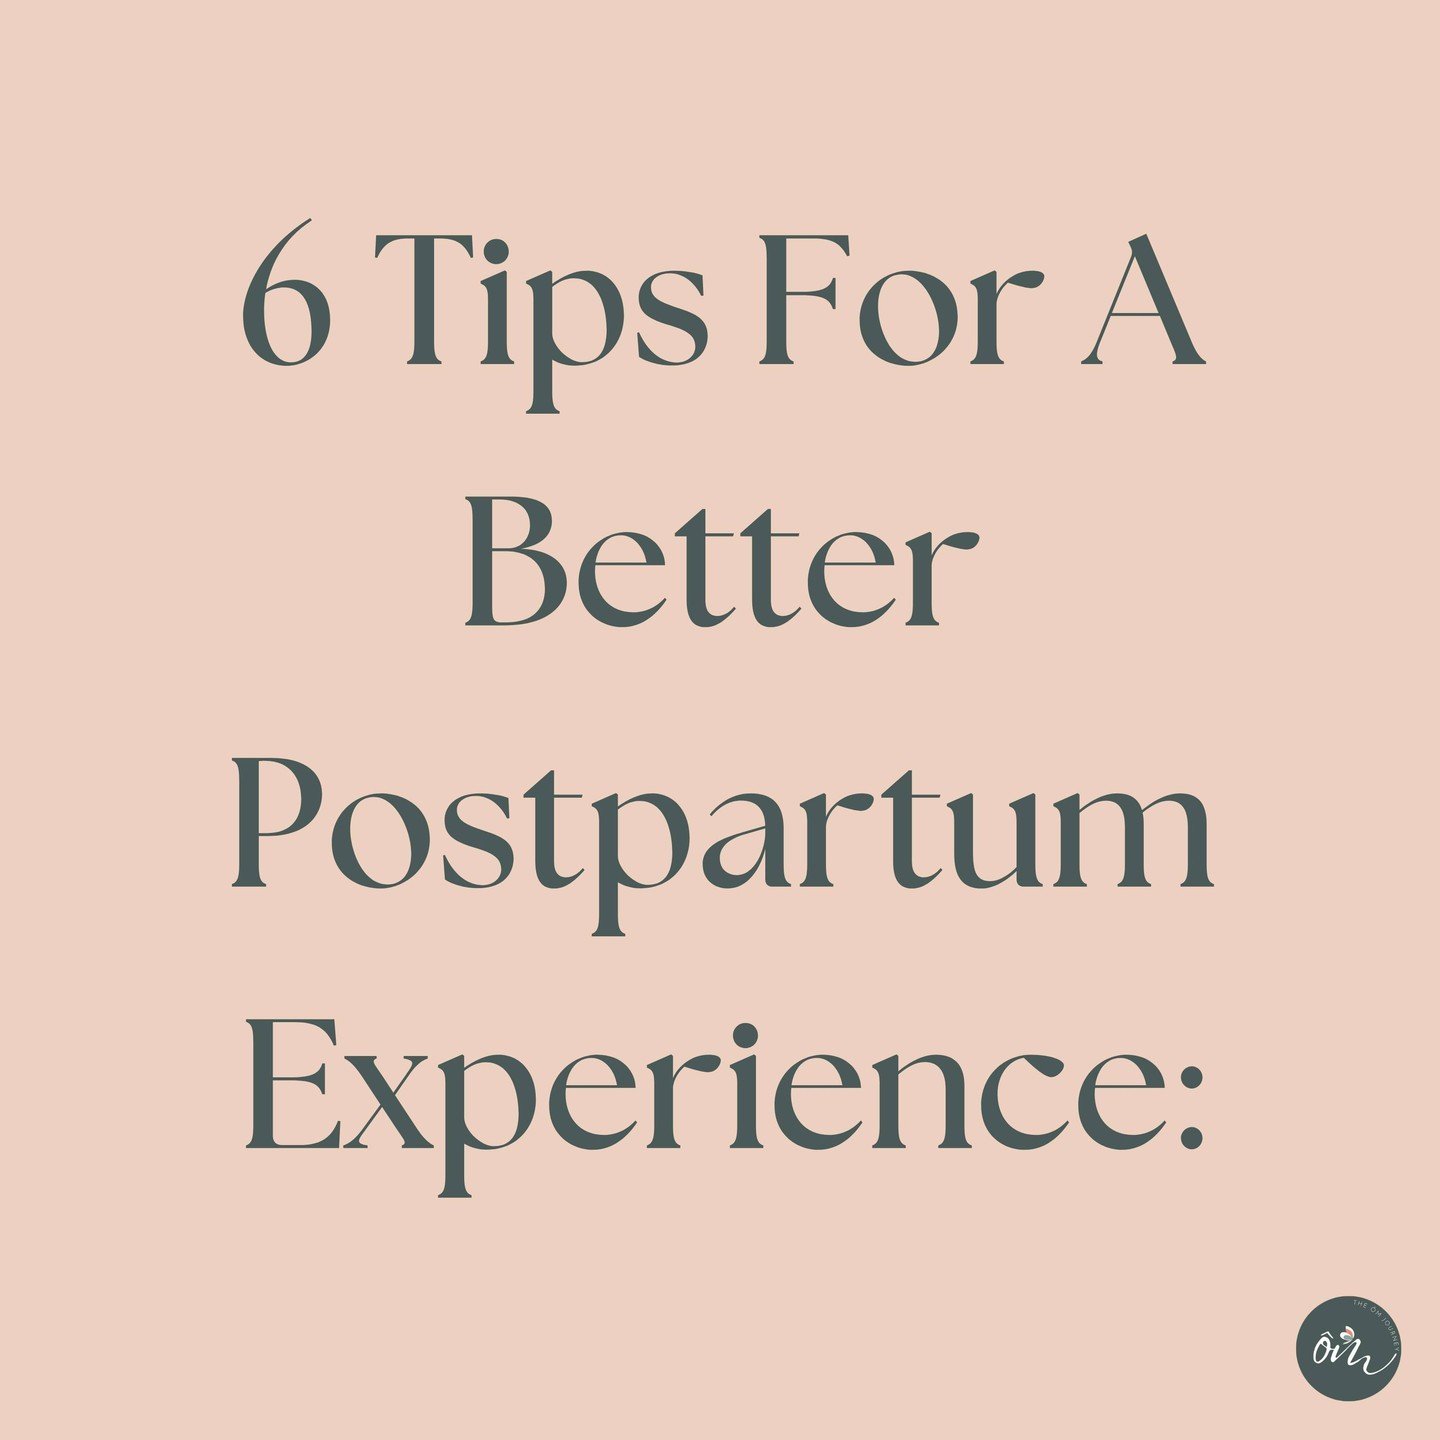 Postpartum tips for all you beautiful mamas out there! 🍼✨

Swipe through for simple, straightforward hacks to help manage the postpartum phase more easily. 

Whether it's catching some extra z's when your baby naps or finding a moment for that much-